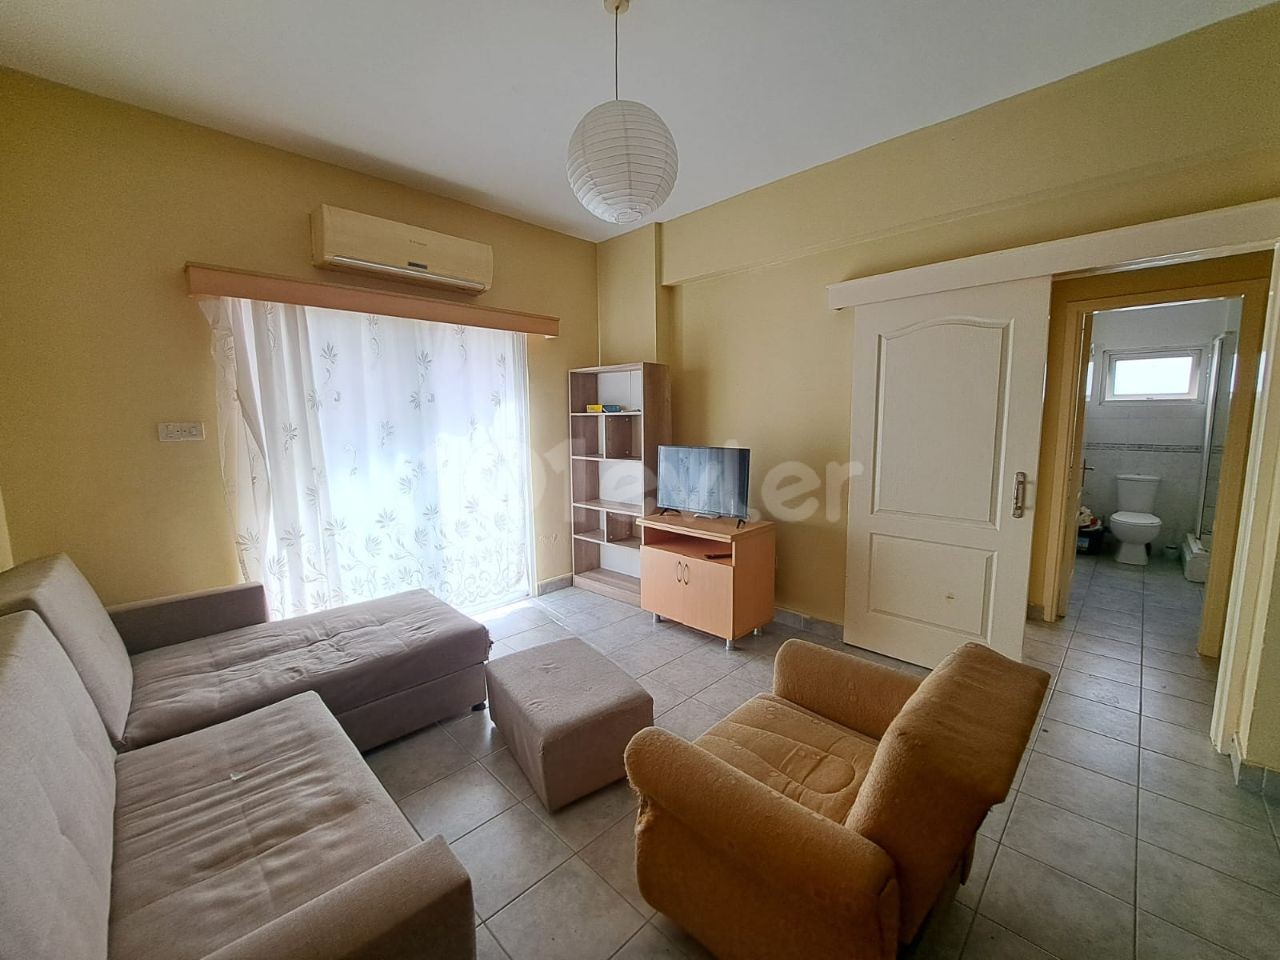 2+1 FLAT FOR RENT ON SALAMIS STREET WITH 3 MONTHS PAYMENT